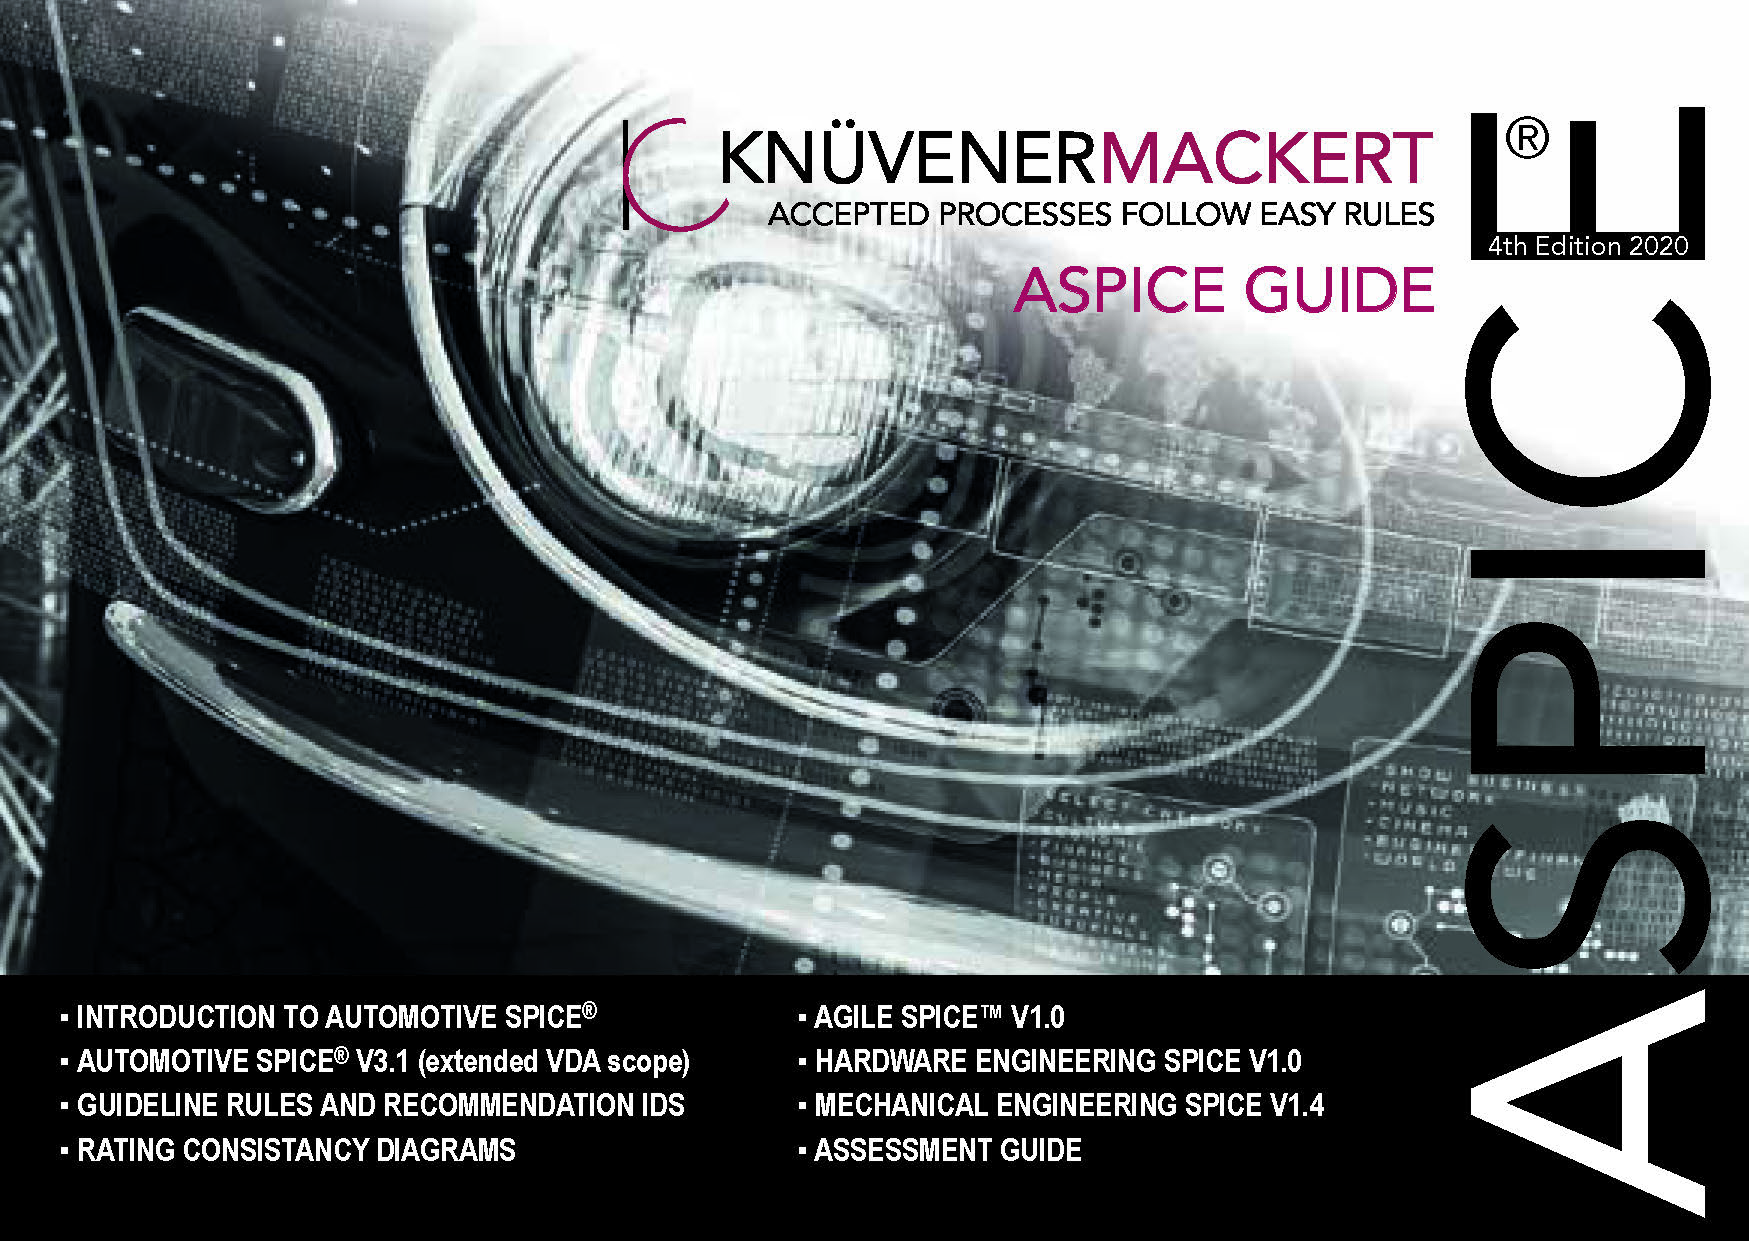 KM SPICE Guide 2020 2nd